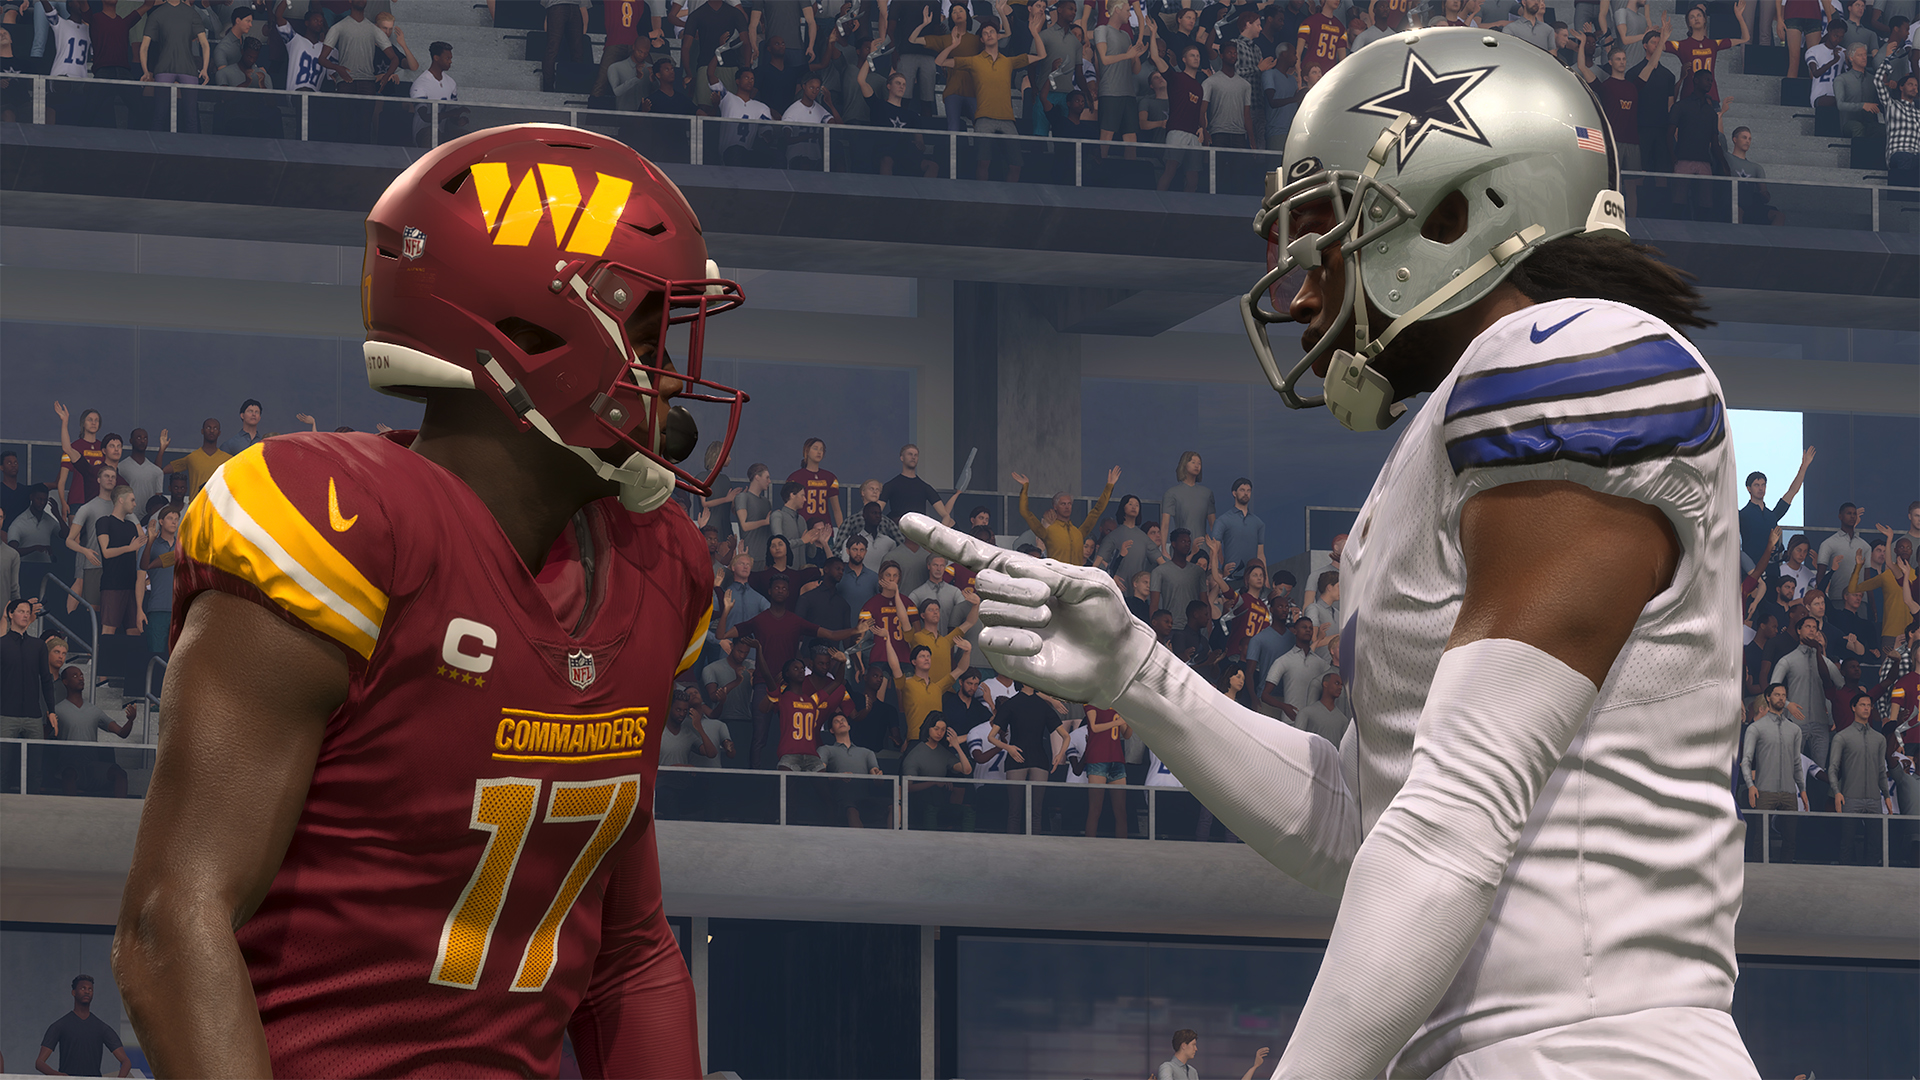 nfl madden 24 release date